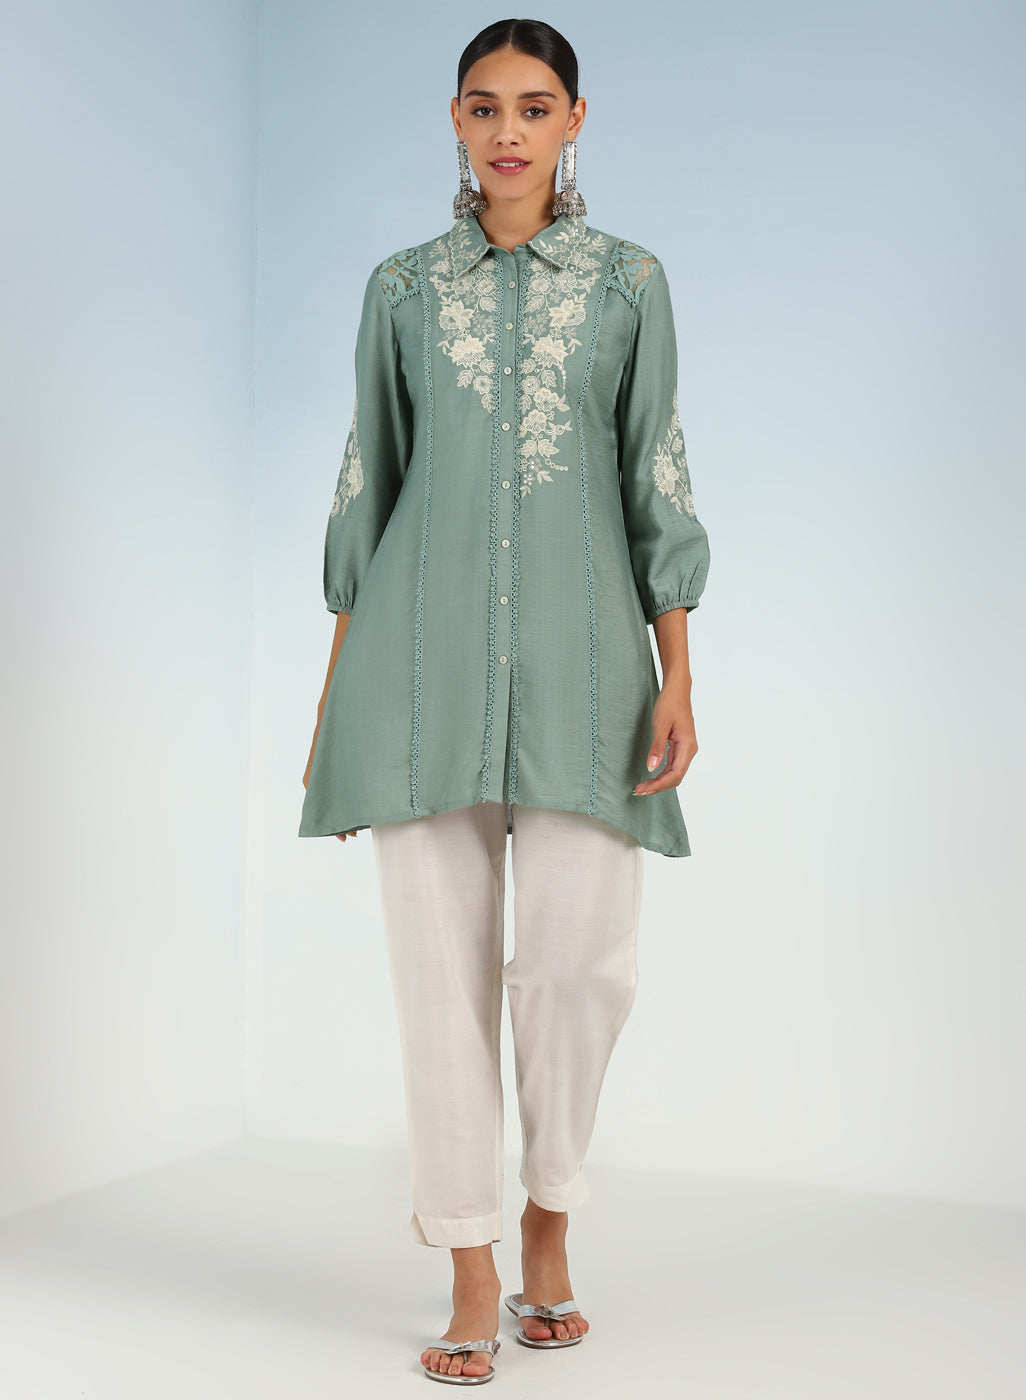 Green Collared Tunic for Women with Puffed Sleeves